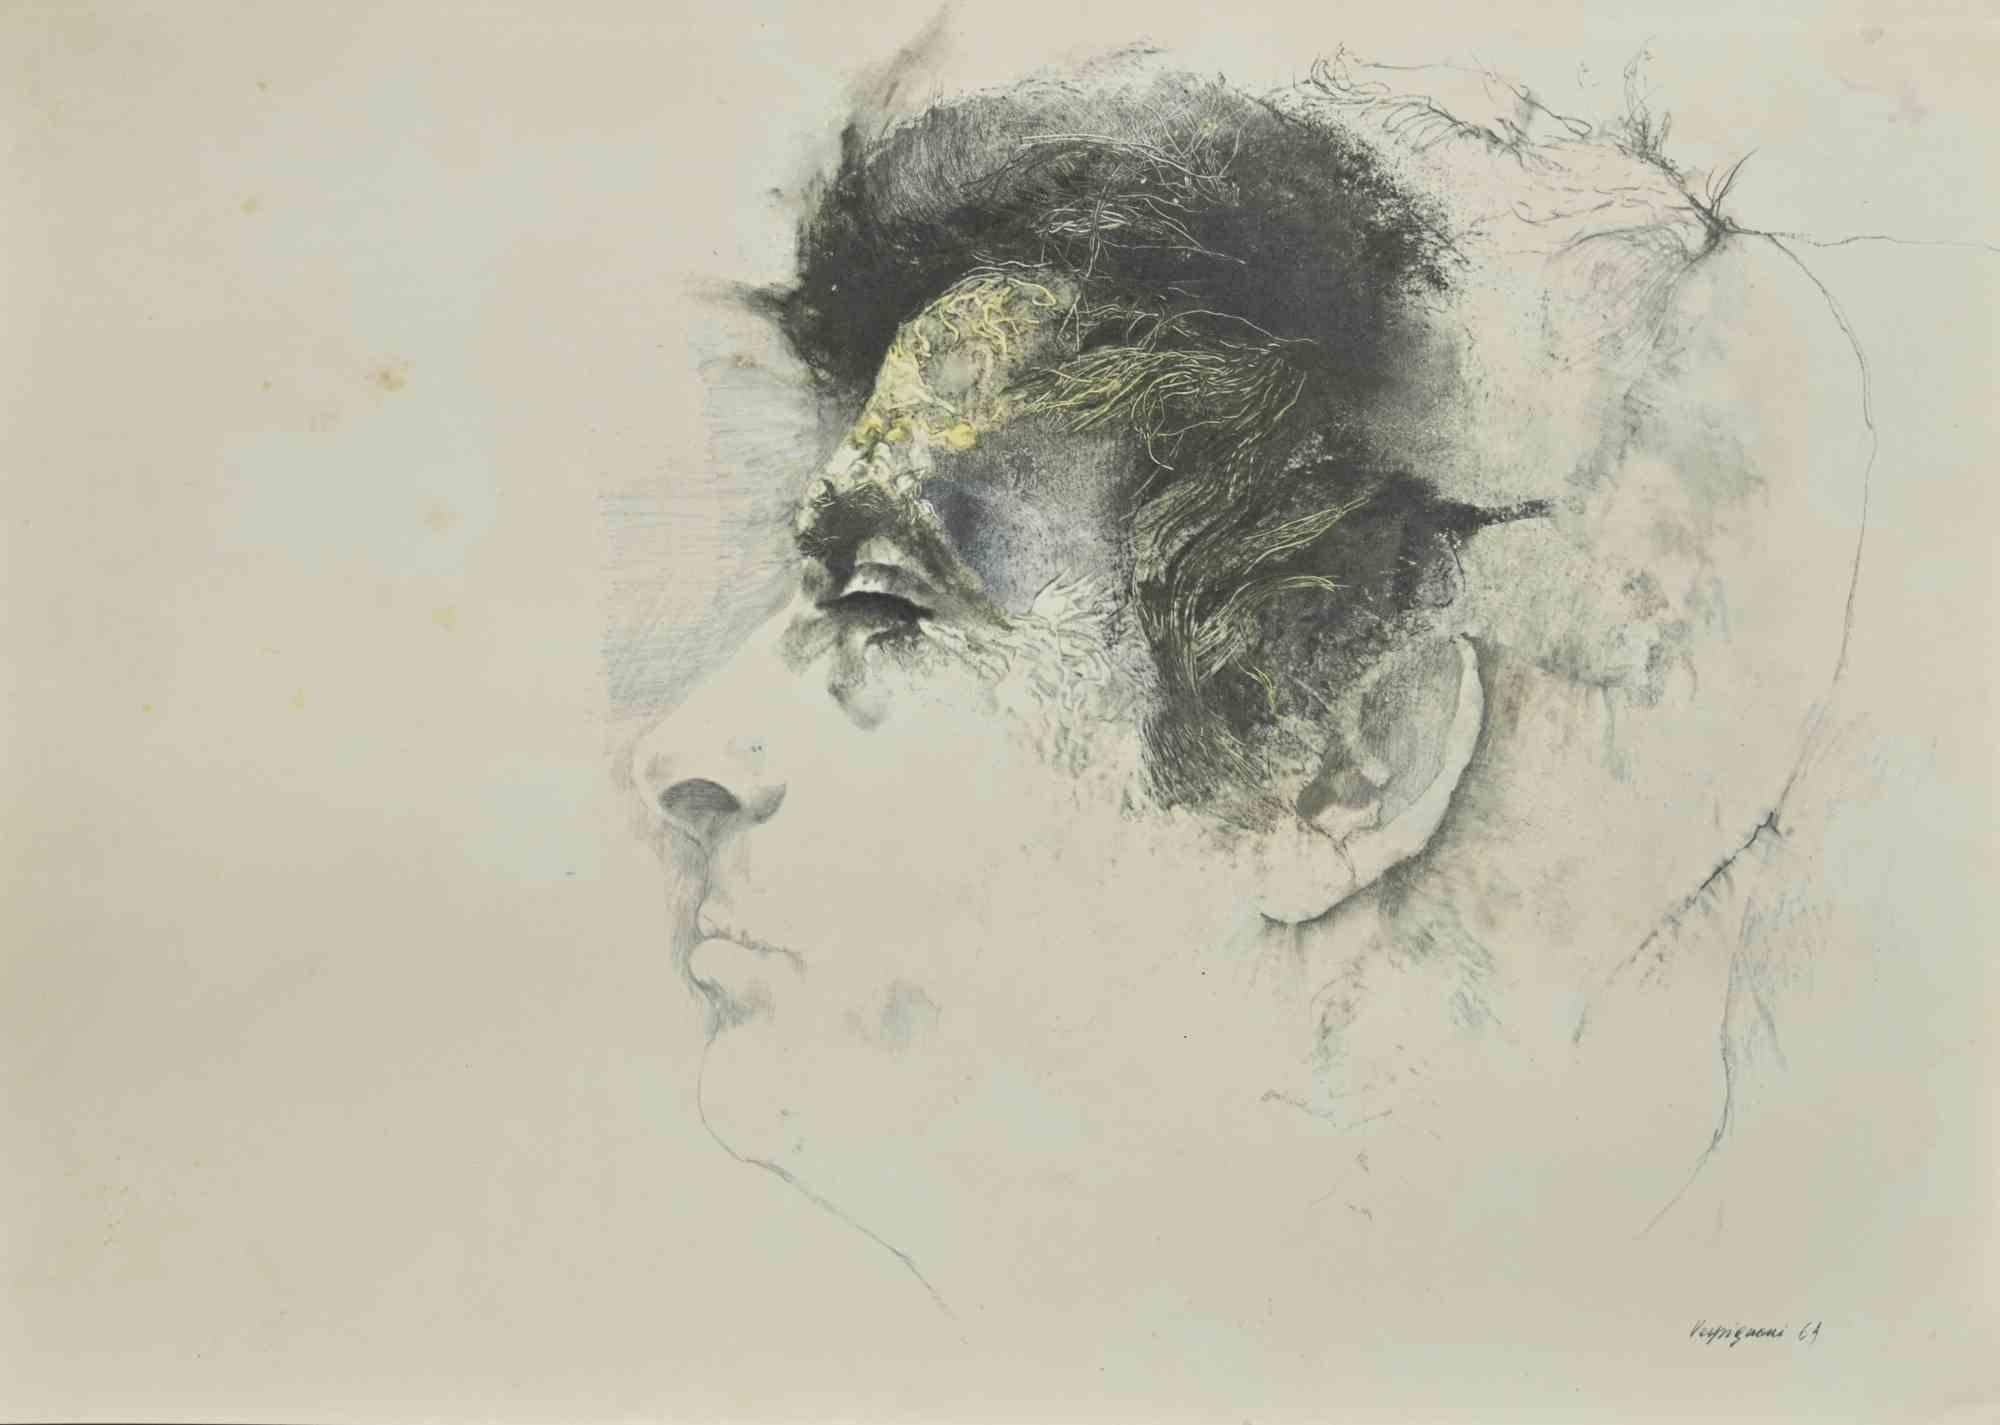 Profile is a phototype print reproducing drawing by Renzo Vespignani of the 1960s

Signed on the plate lower right.

Good conditions with slight foxing.

The artwork is depicted through strong strokes and perfect hatchings.